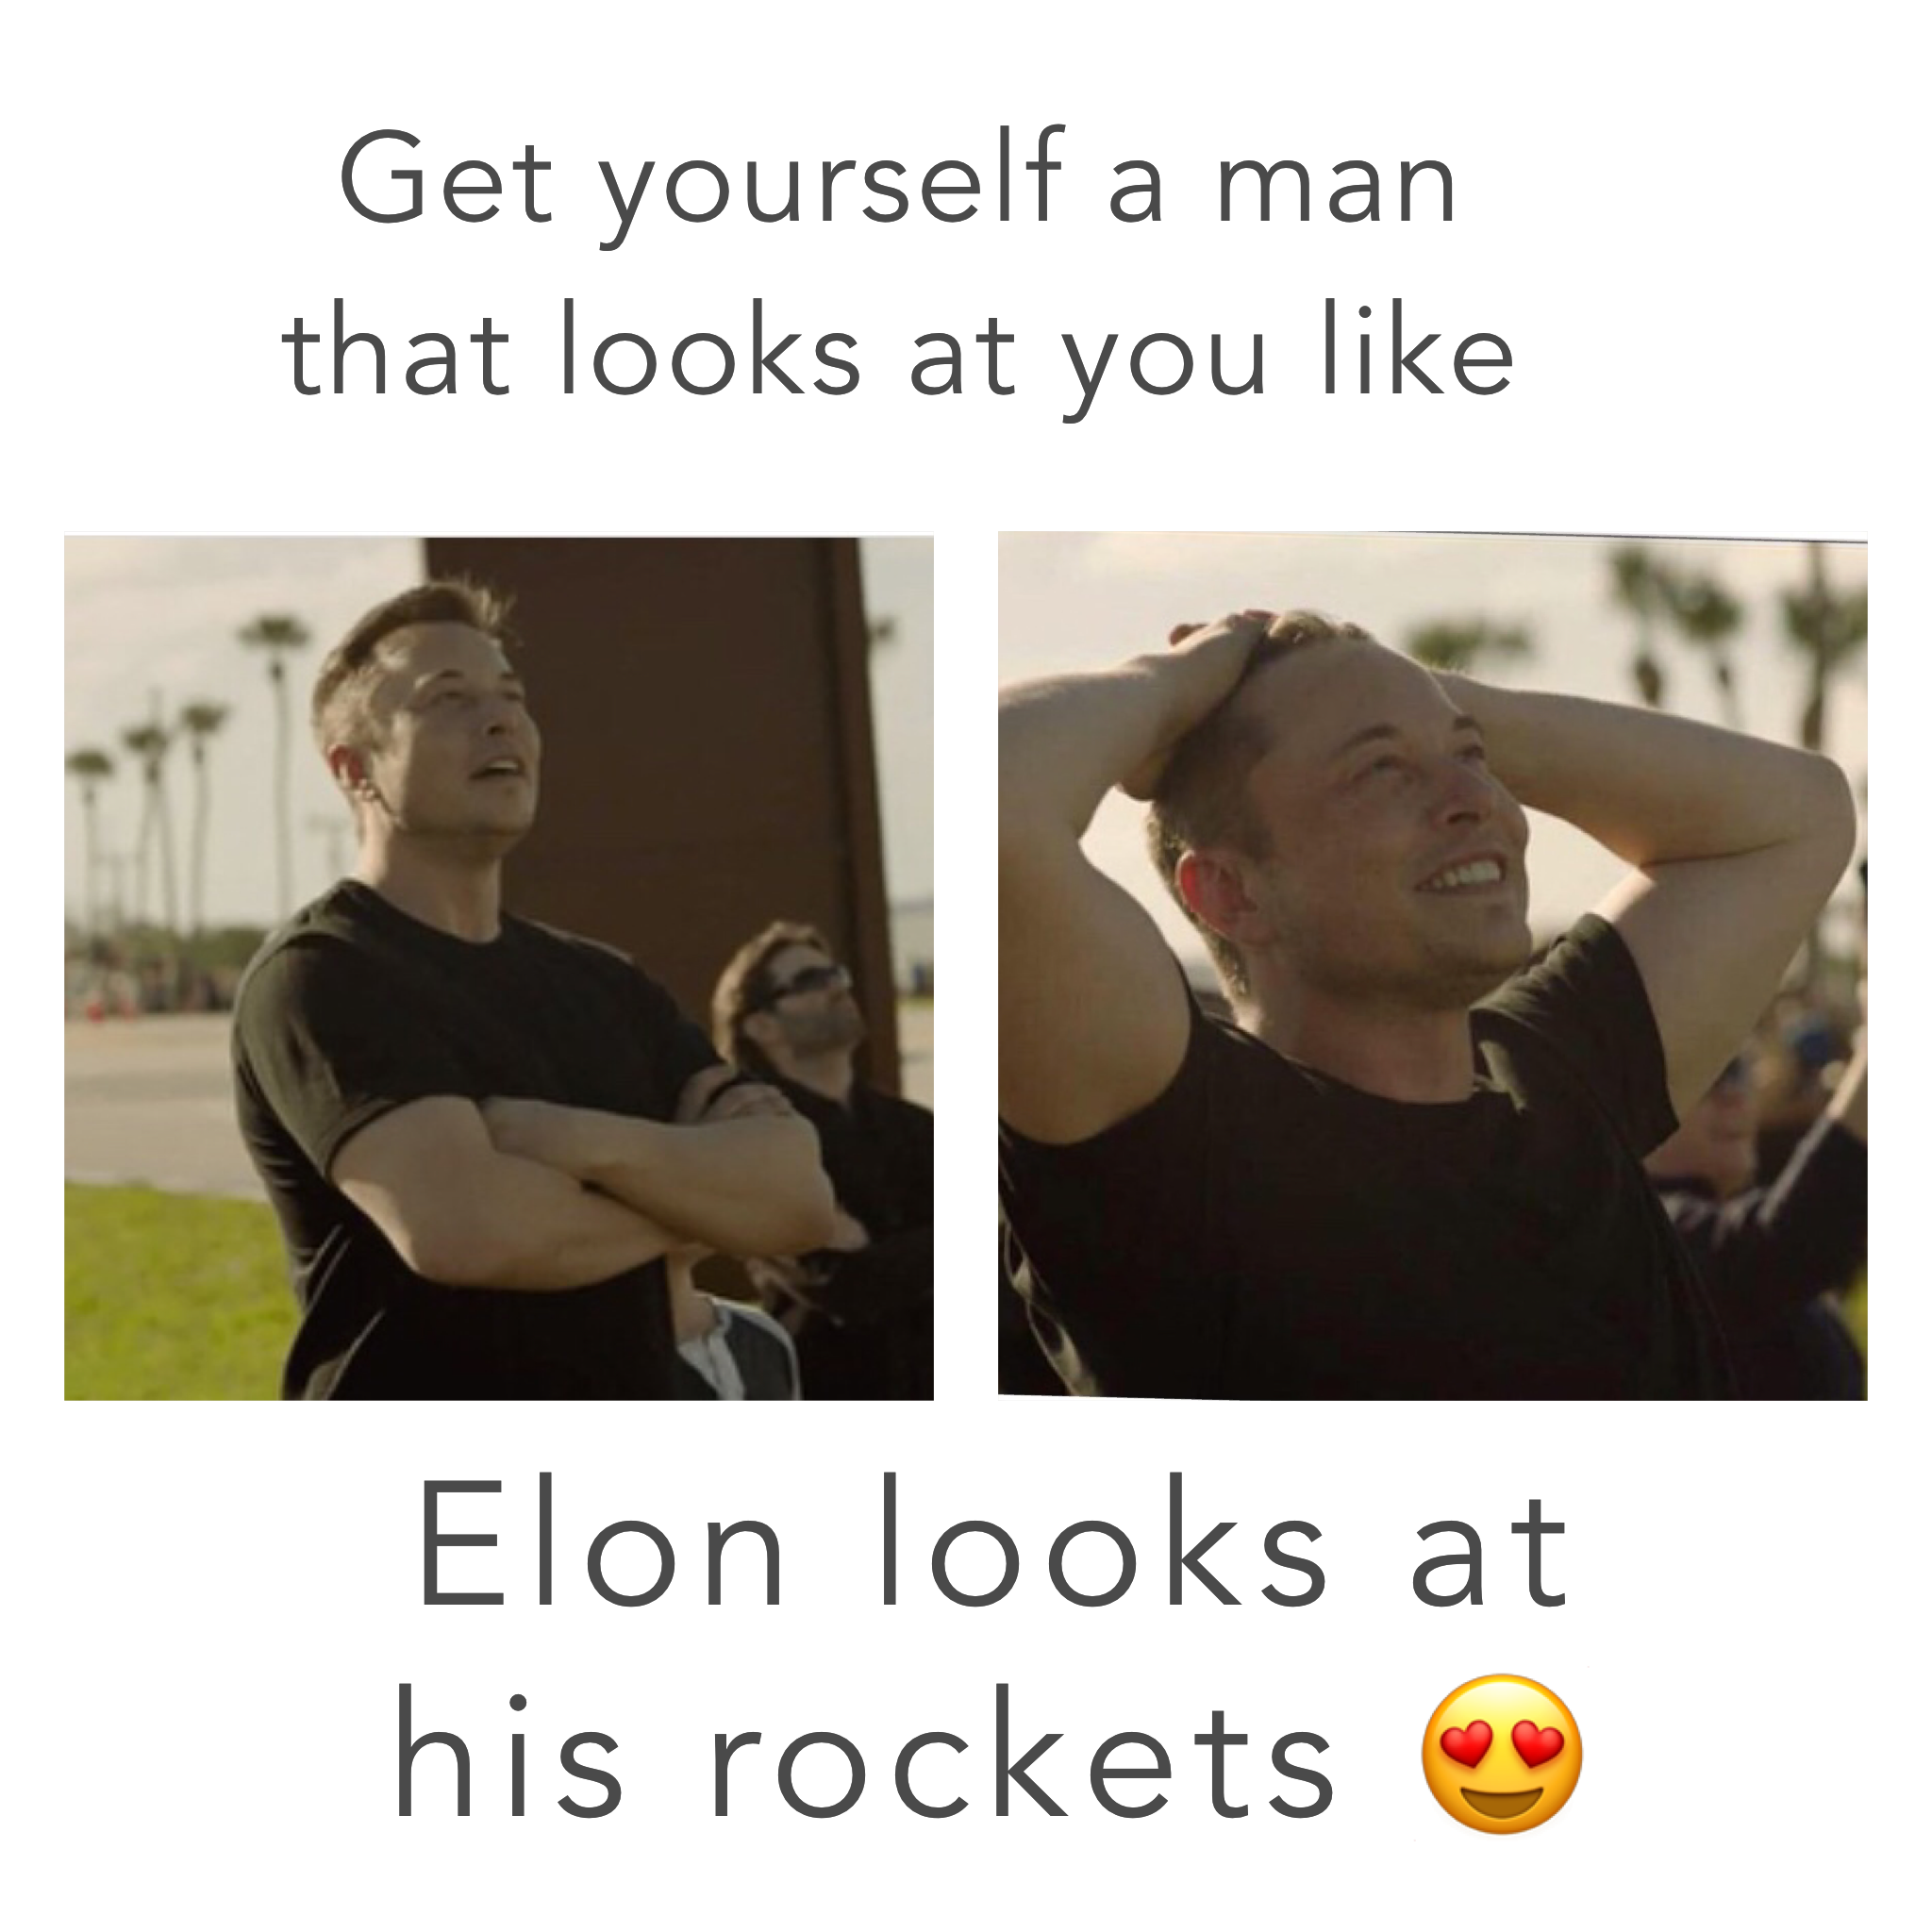 spacex memes - Get yourself a man that looks at you Elon looks at his rockets